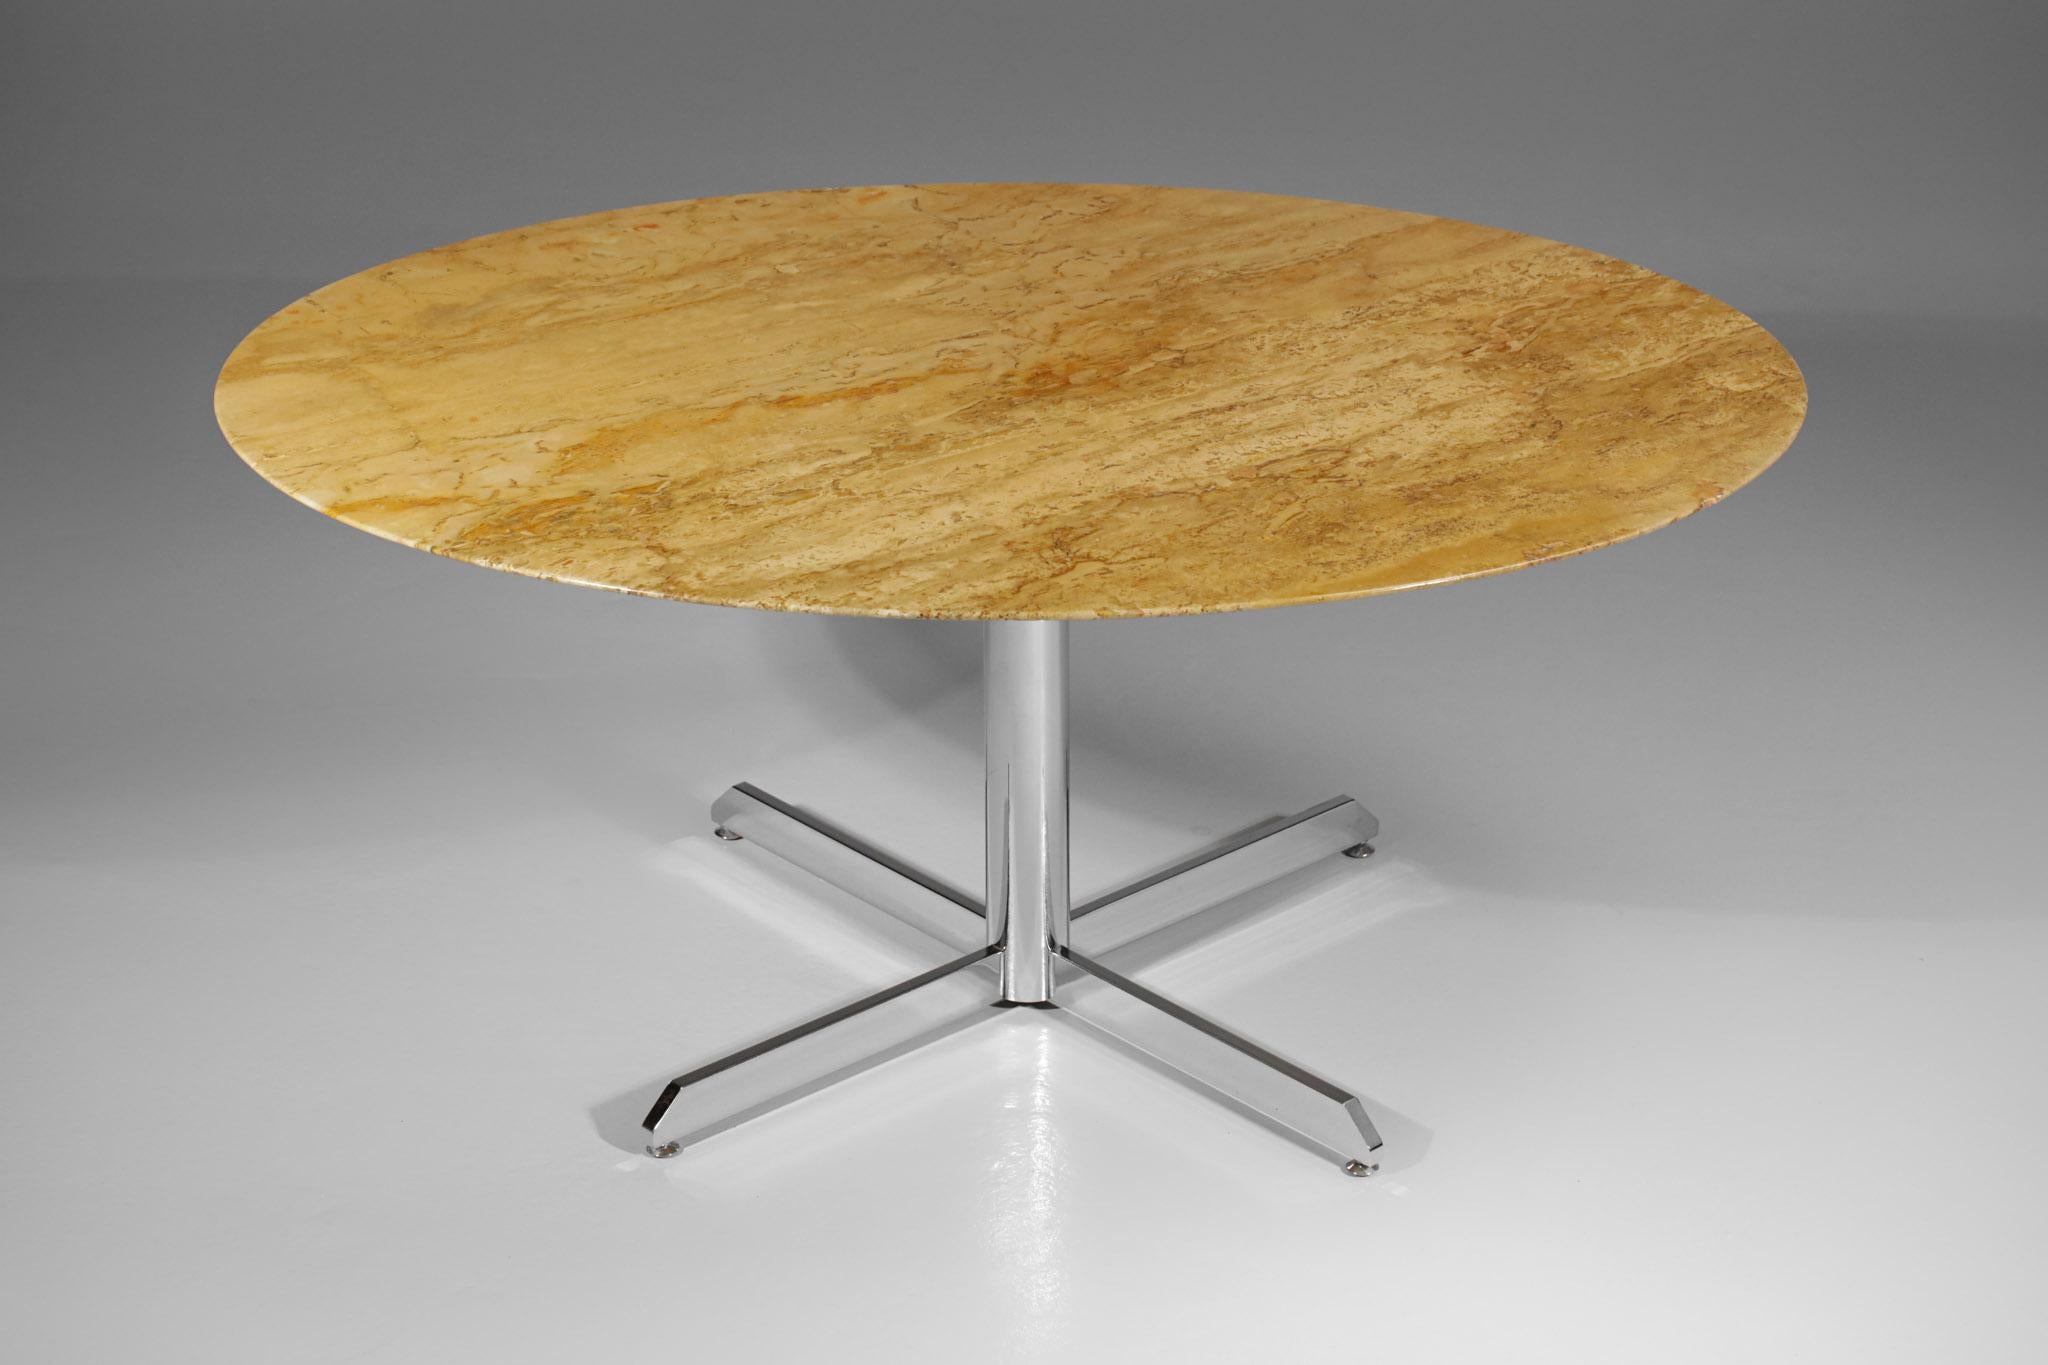 Late 20th Century Oval Travertine Marble Dining Table with Chrome Four Star-Feet from the 70's